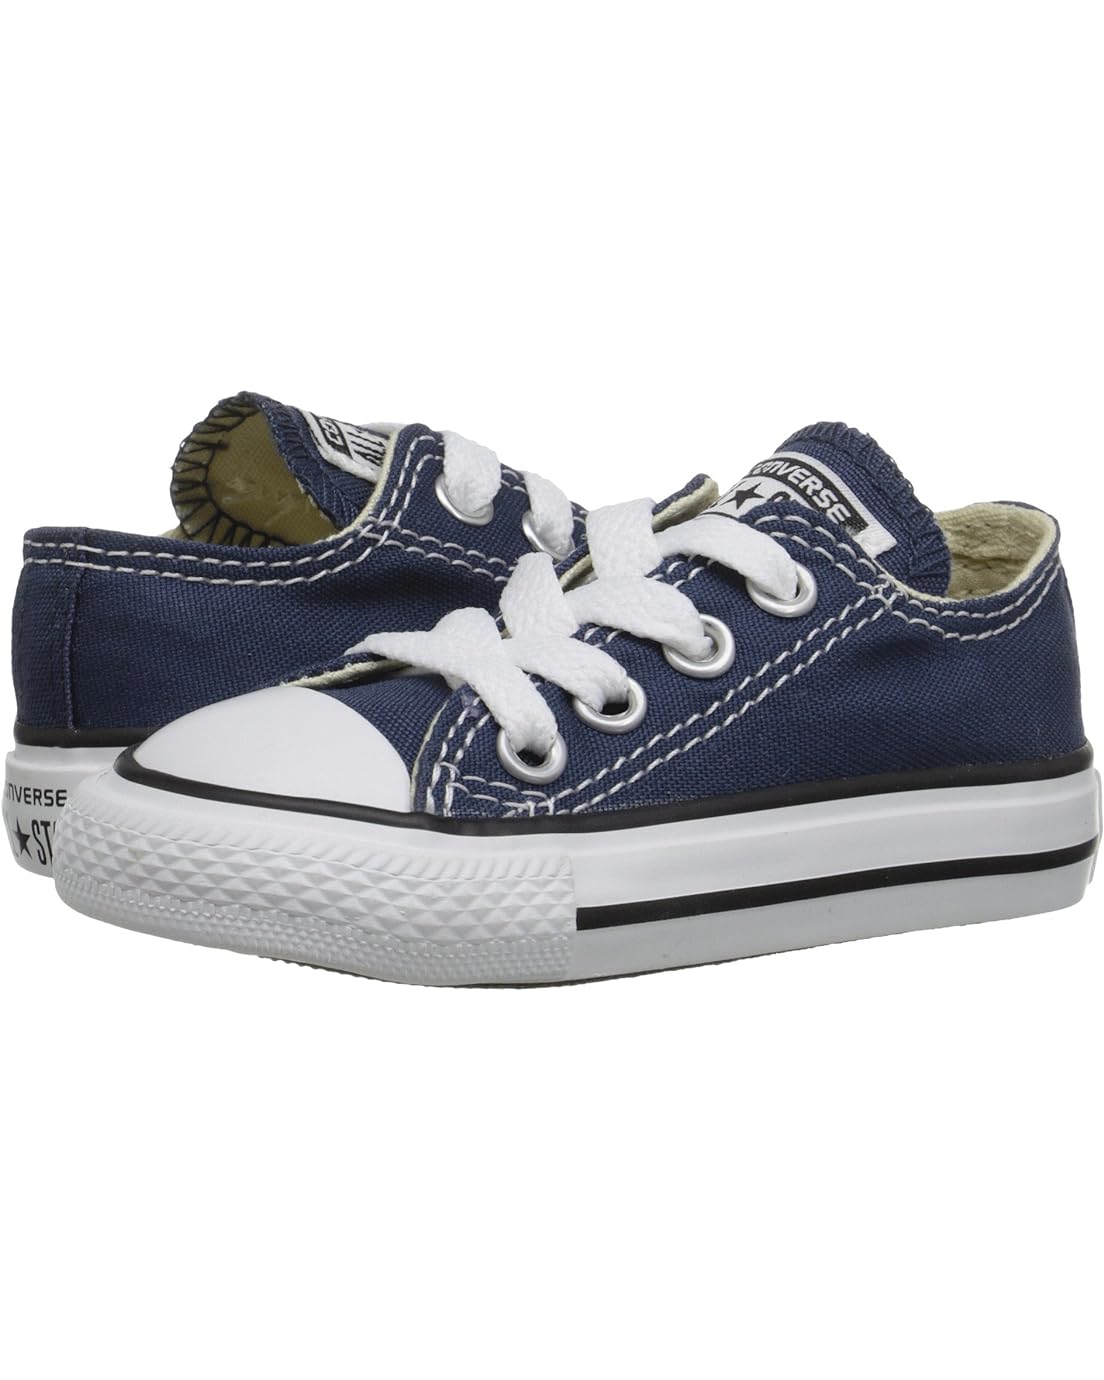 Converse Chuck Taylor All Star Core Ox (Infant/Toddler)